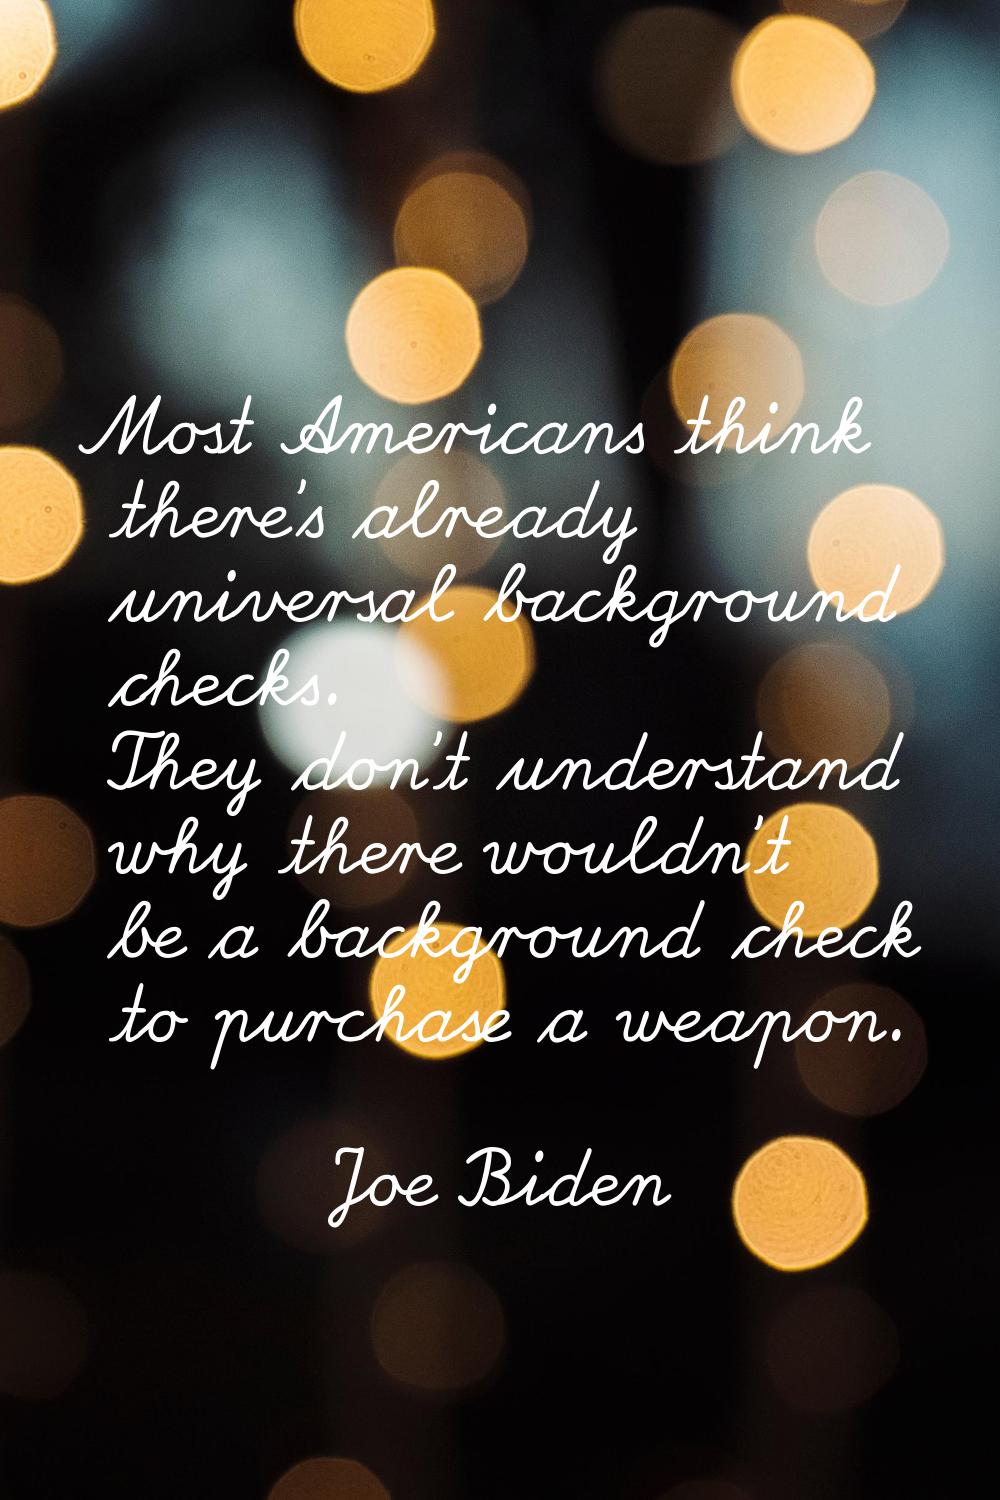 Most Americans think there's already universal background checks. They don't understand why there w